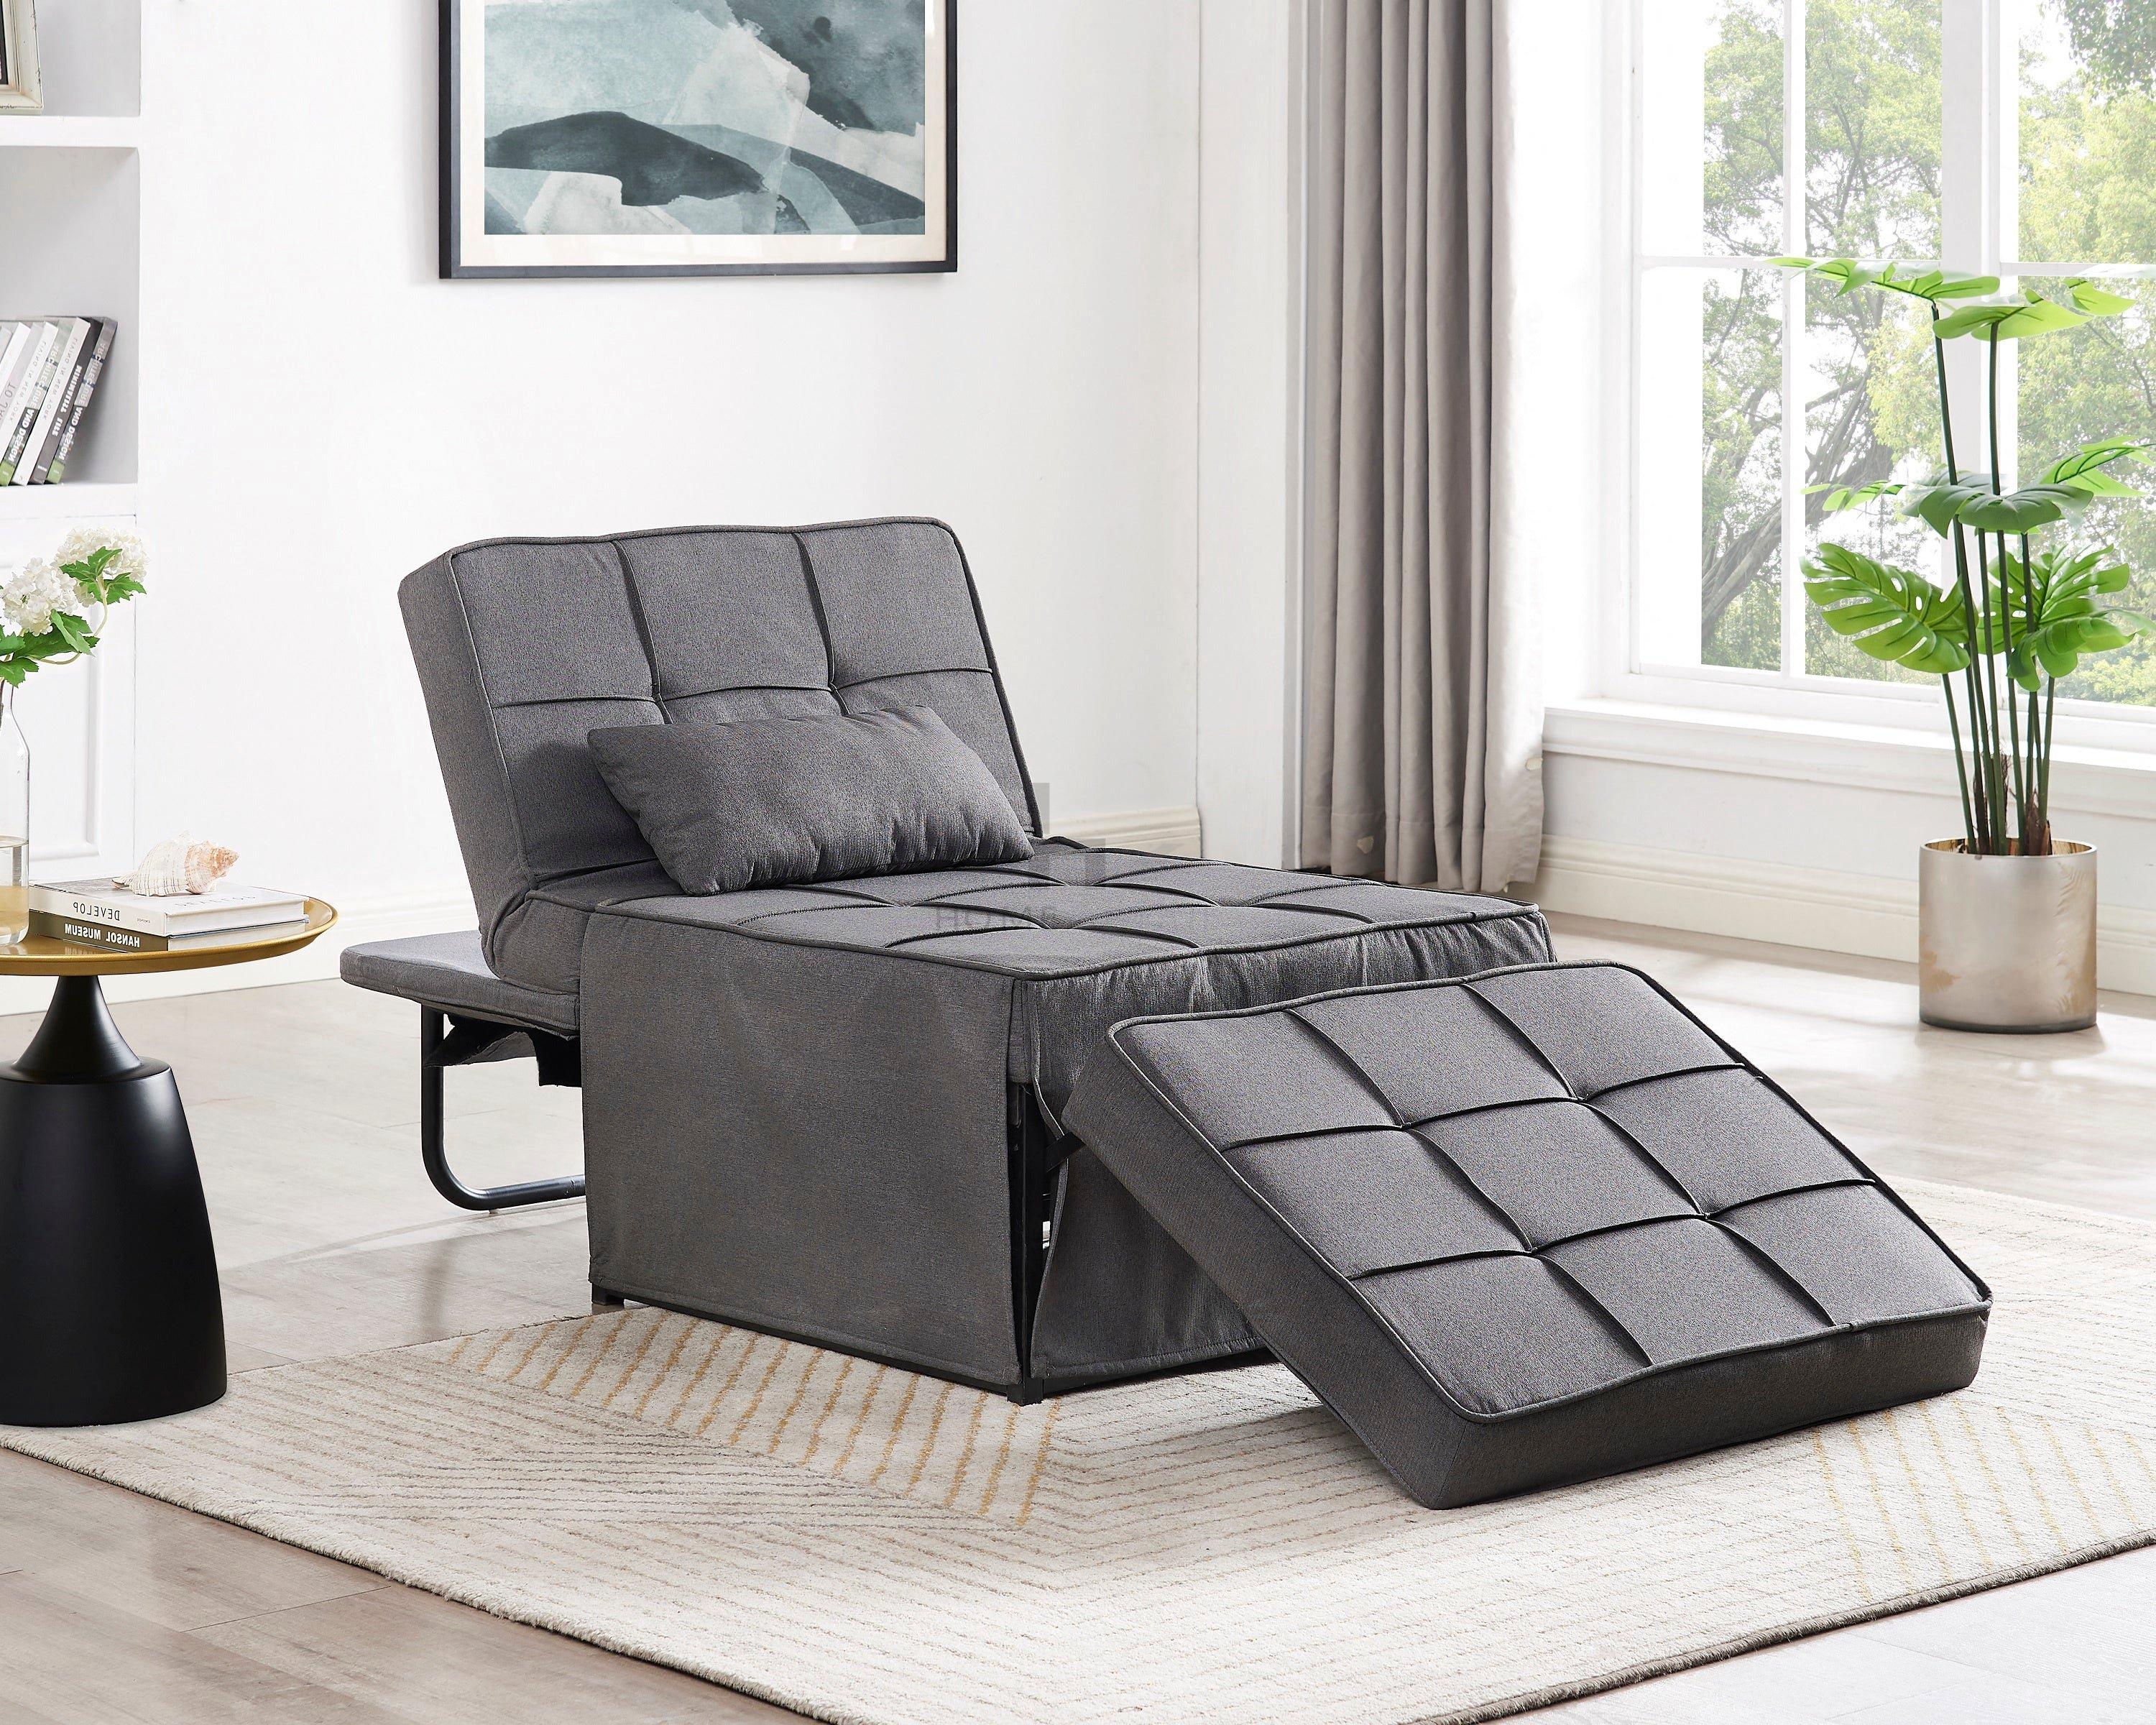 Oscar Single Chair Ottoman Sofa Bed With Chaise Feature and Matching Cushion